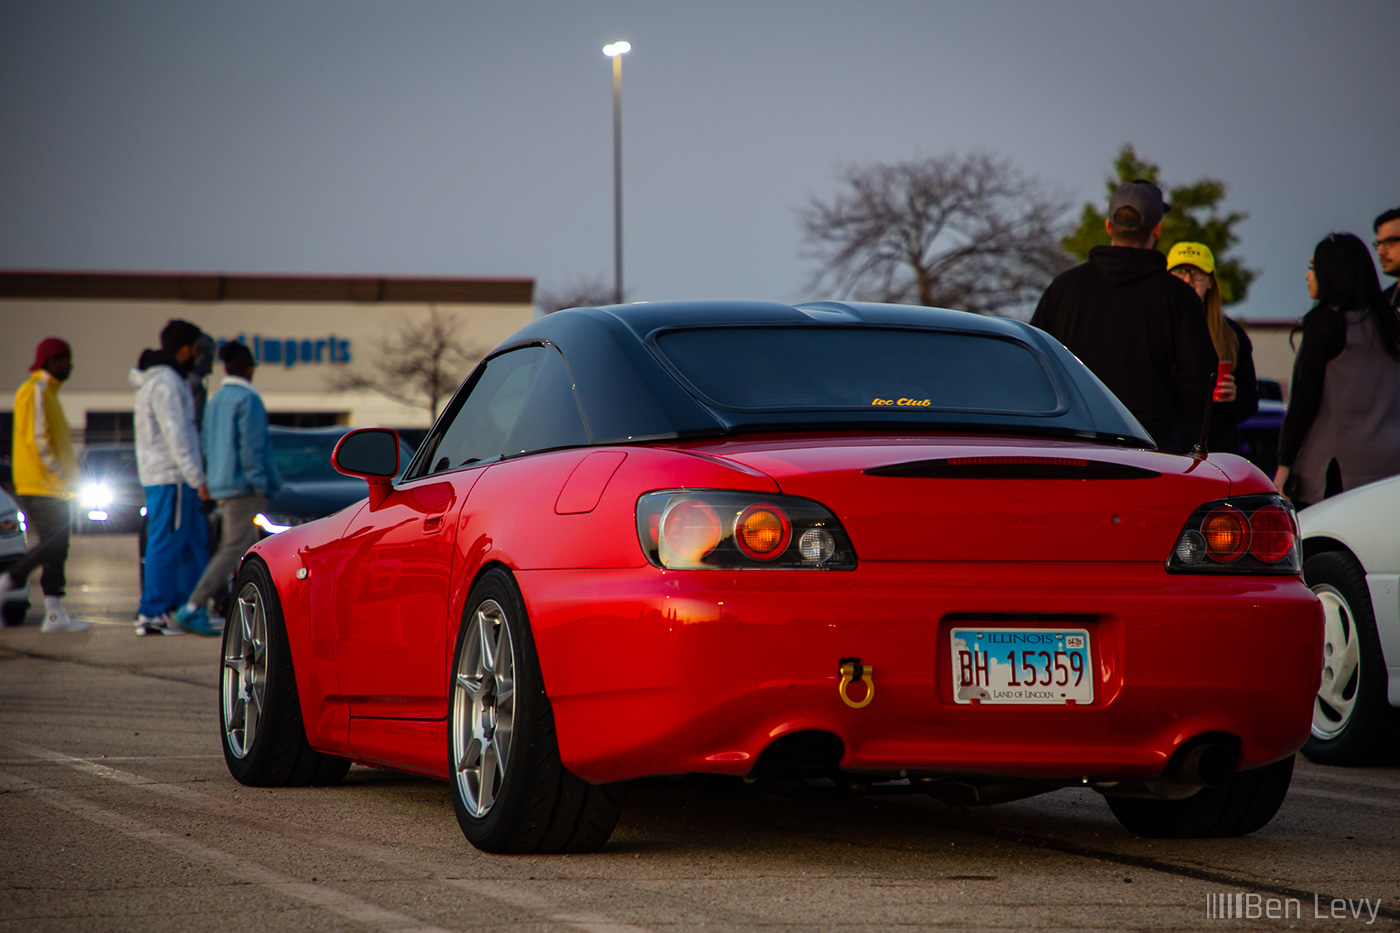 Red Honda S2000 at Tuners and Tacos Meet